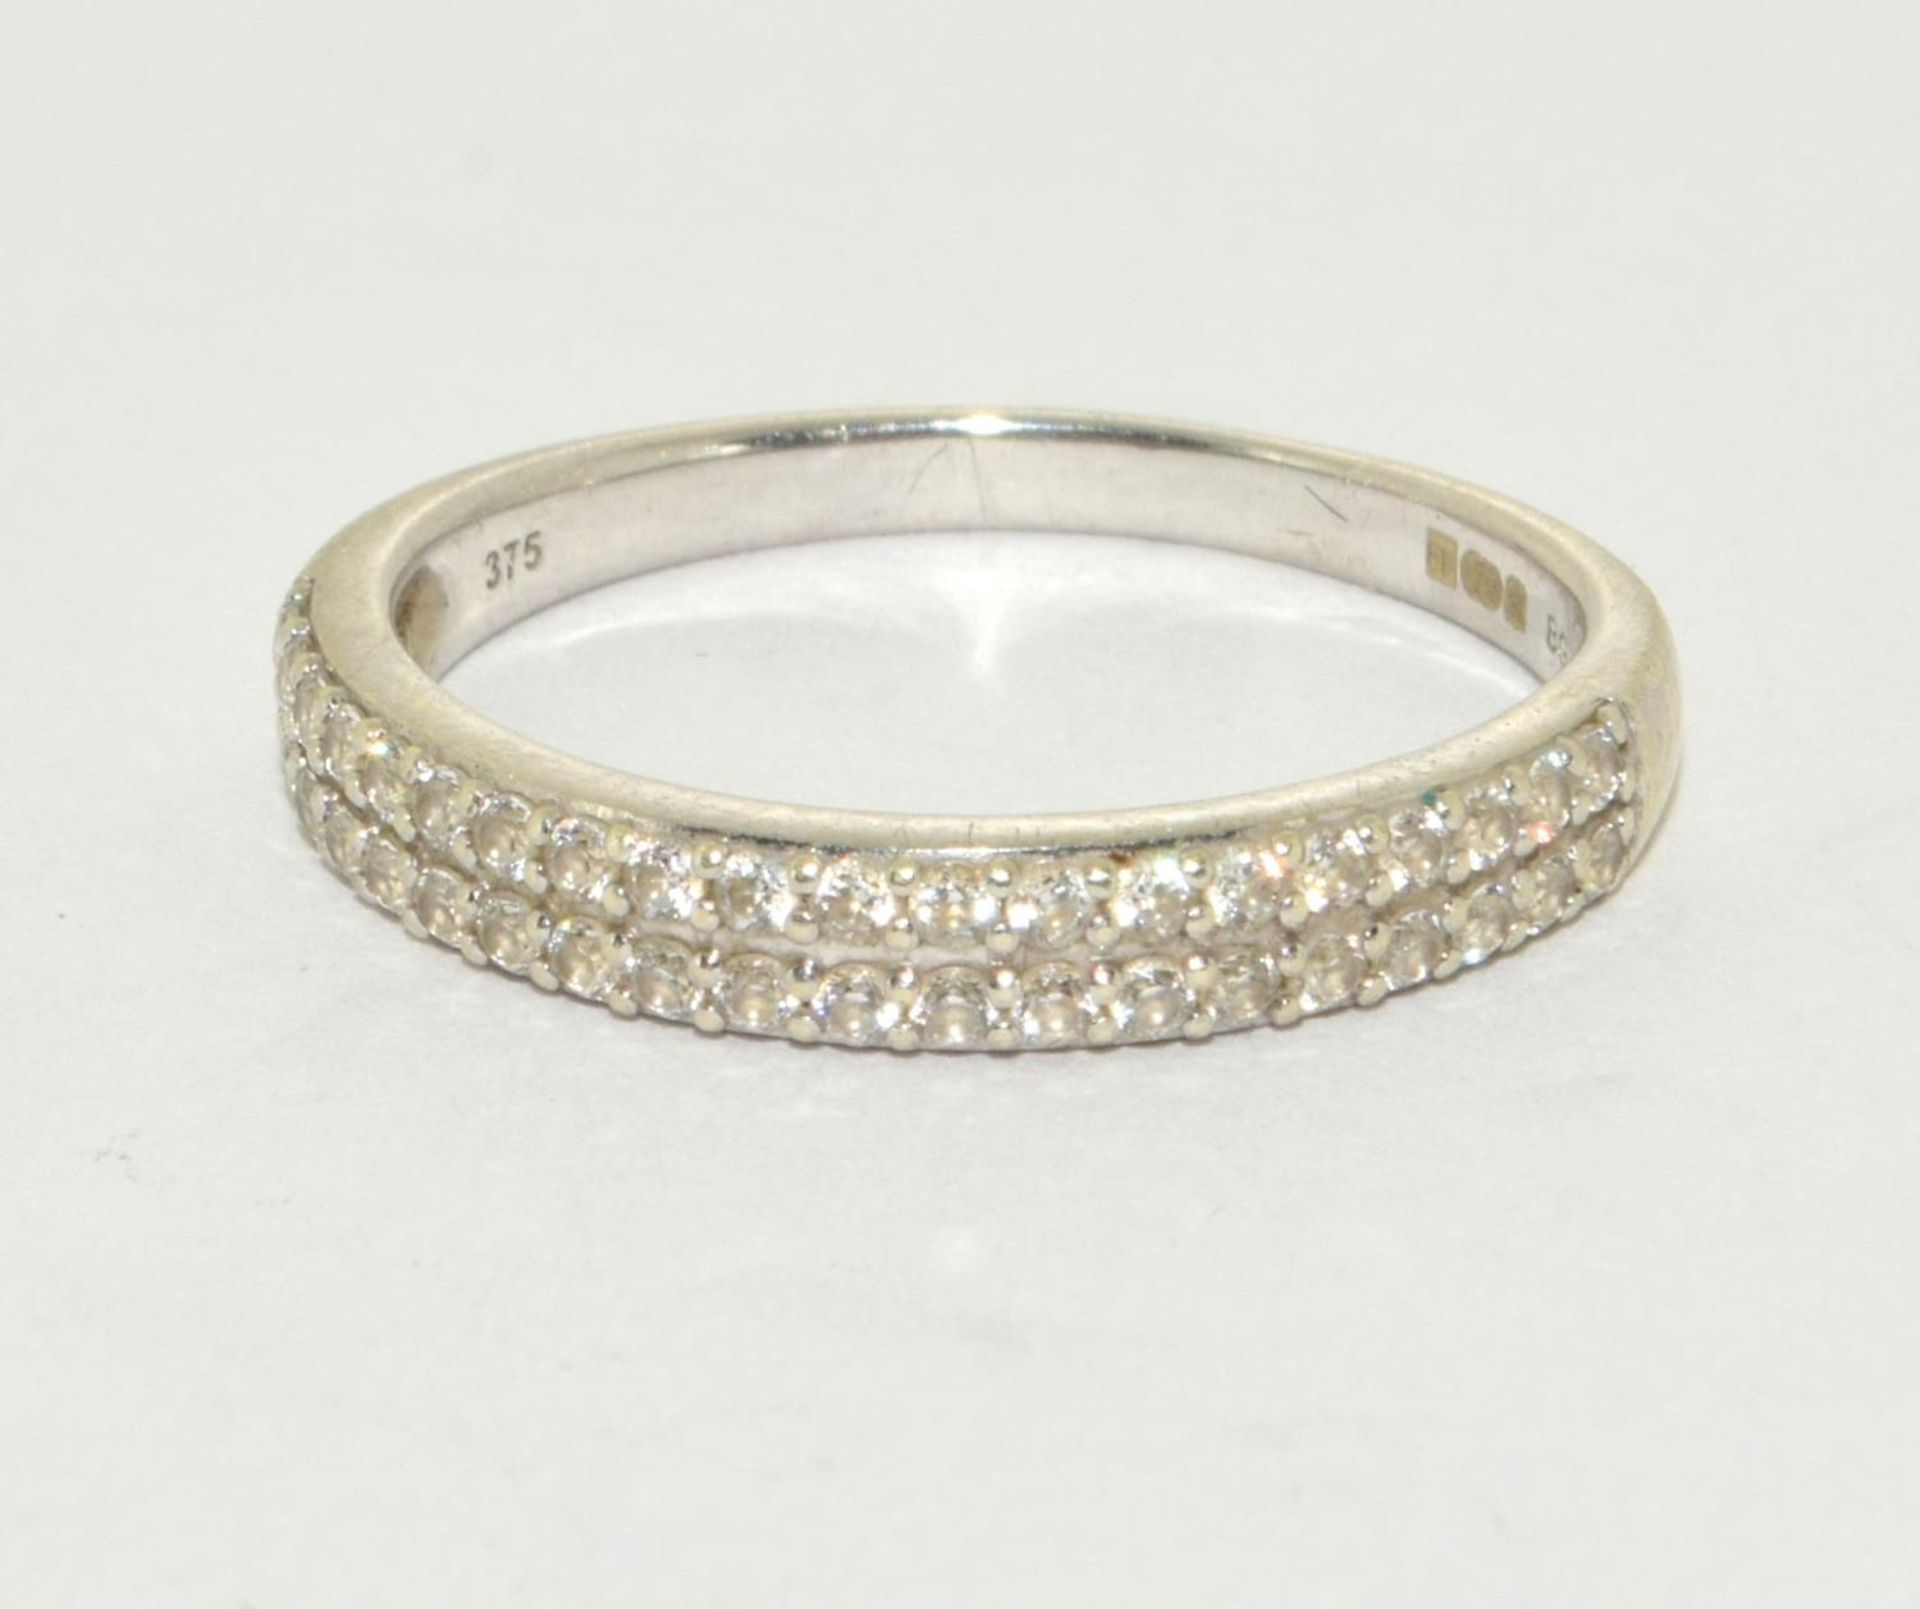 9ct white gold twin band 1/2 eternity ring size P - Image 5 of 5